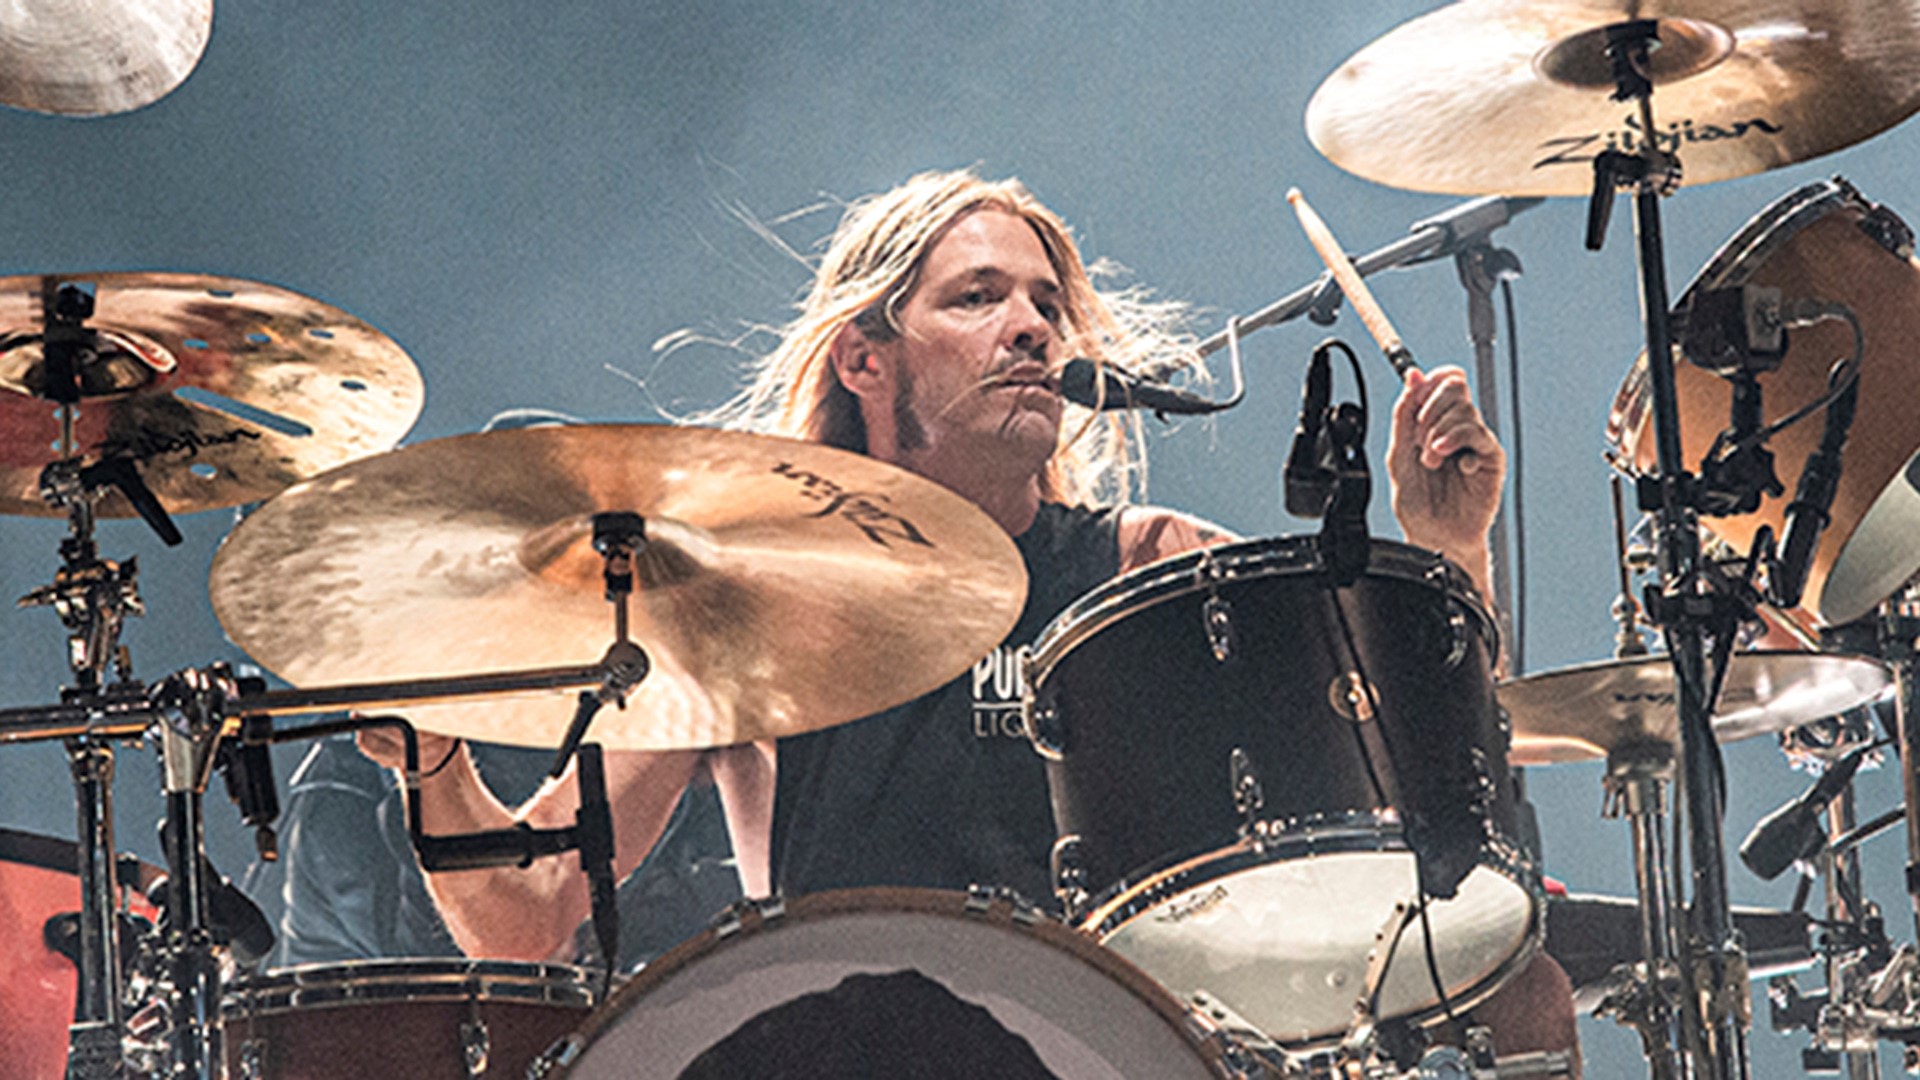 Foo Fighters drummer Taylor Hawkins died Friday, the band announced. He was 50. In this 2019 interview, he lists many of his drumming influences.